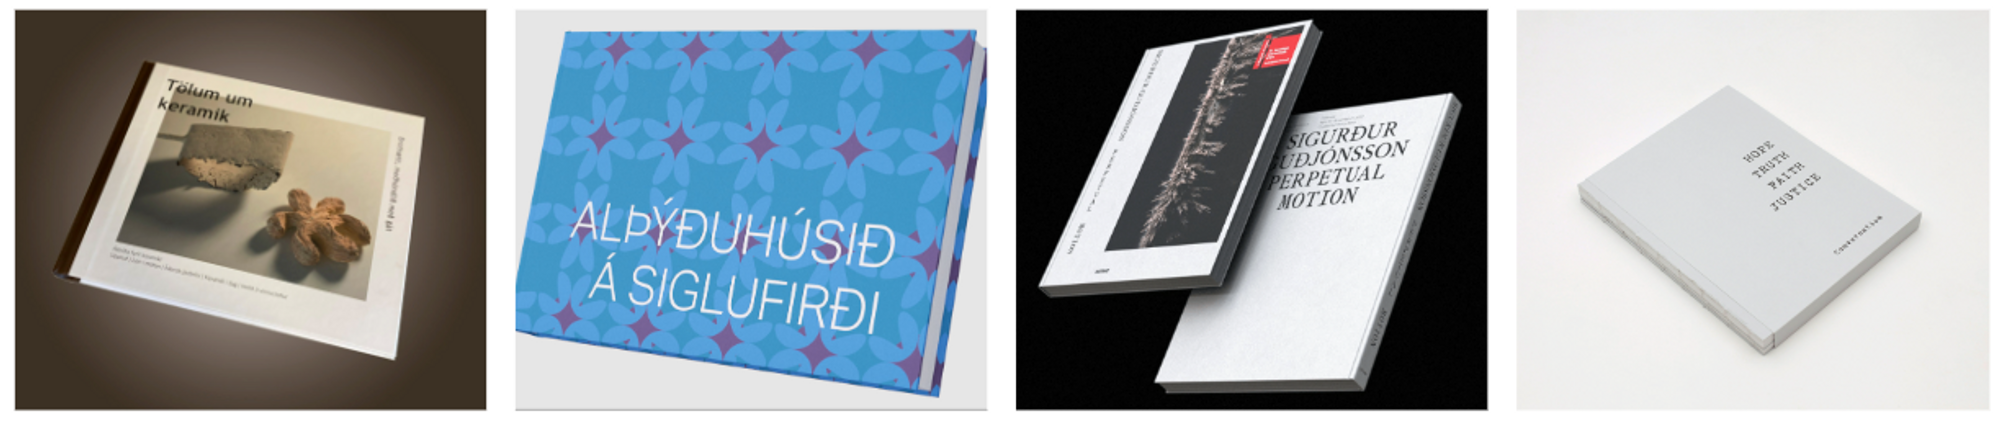 Icelandic Publications related to visual art